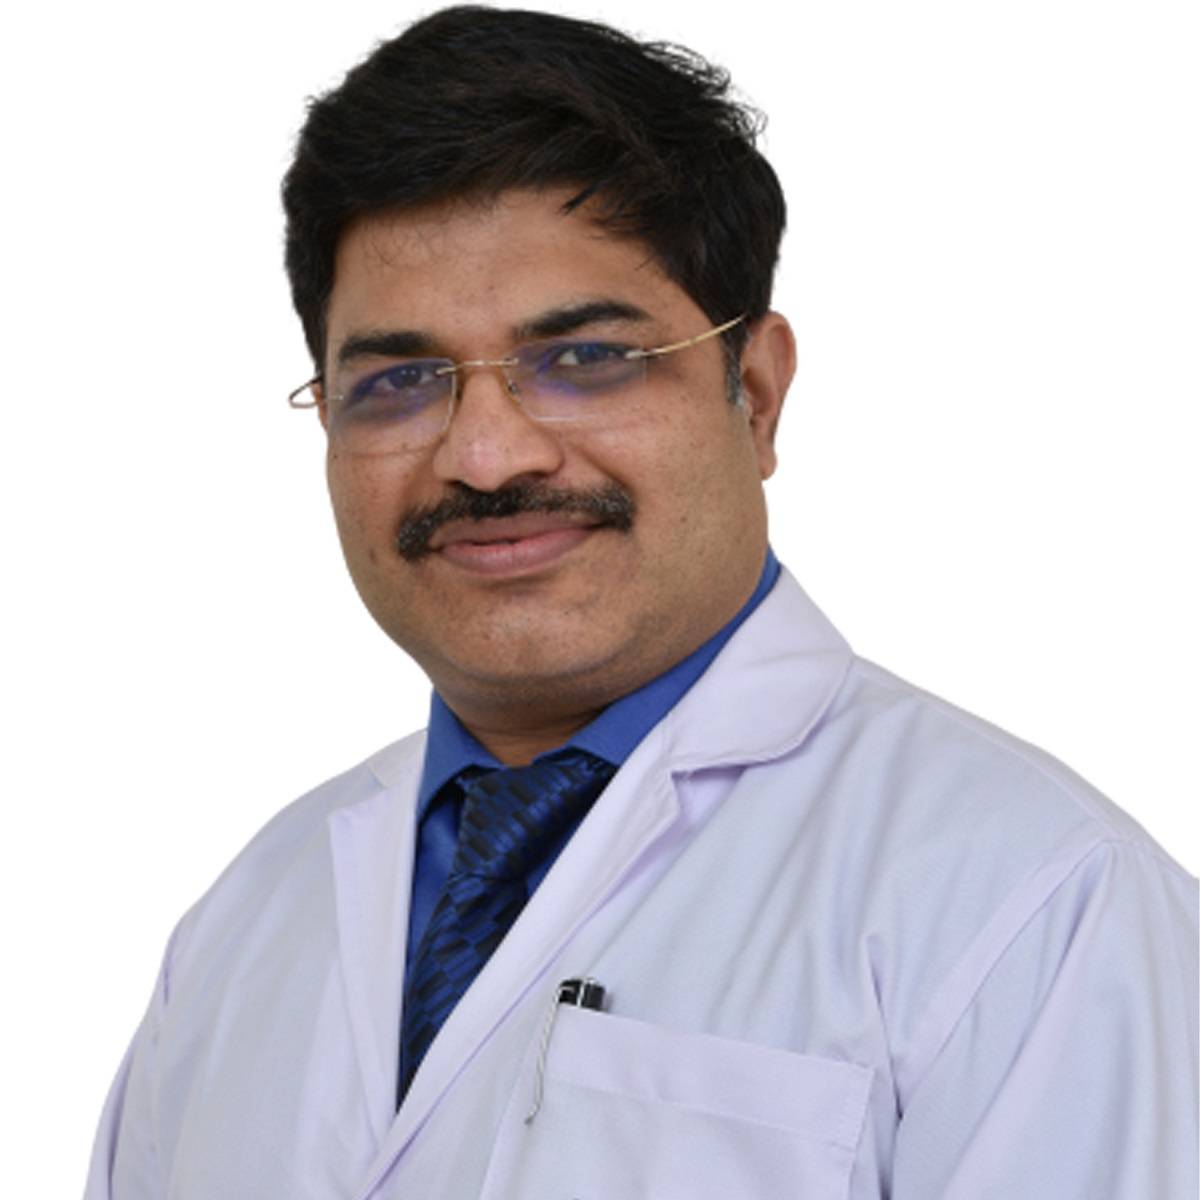 Dr. Anil Heroor: Surgical oncologist in Maharashtra, India